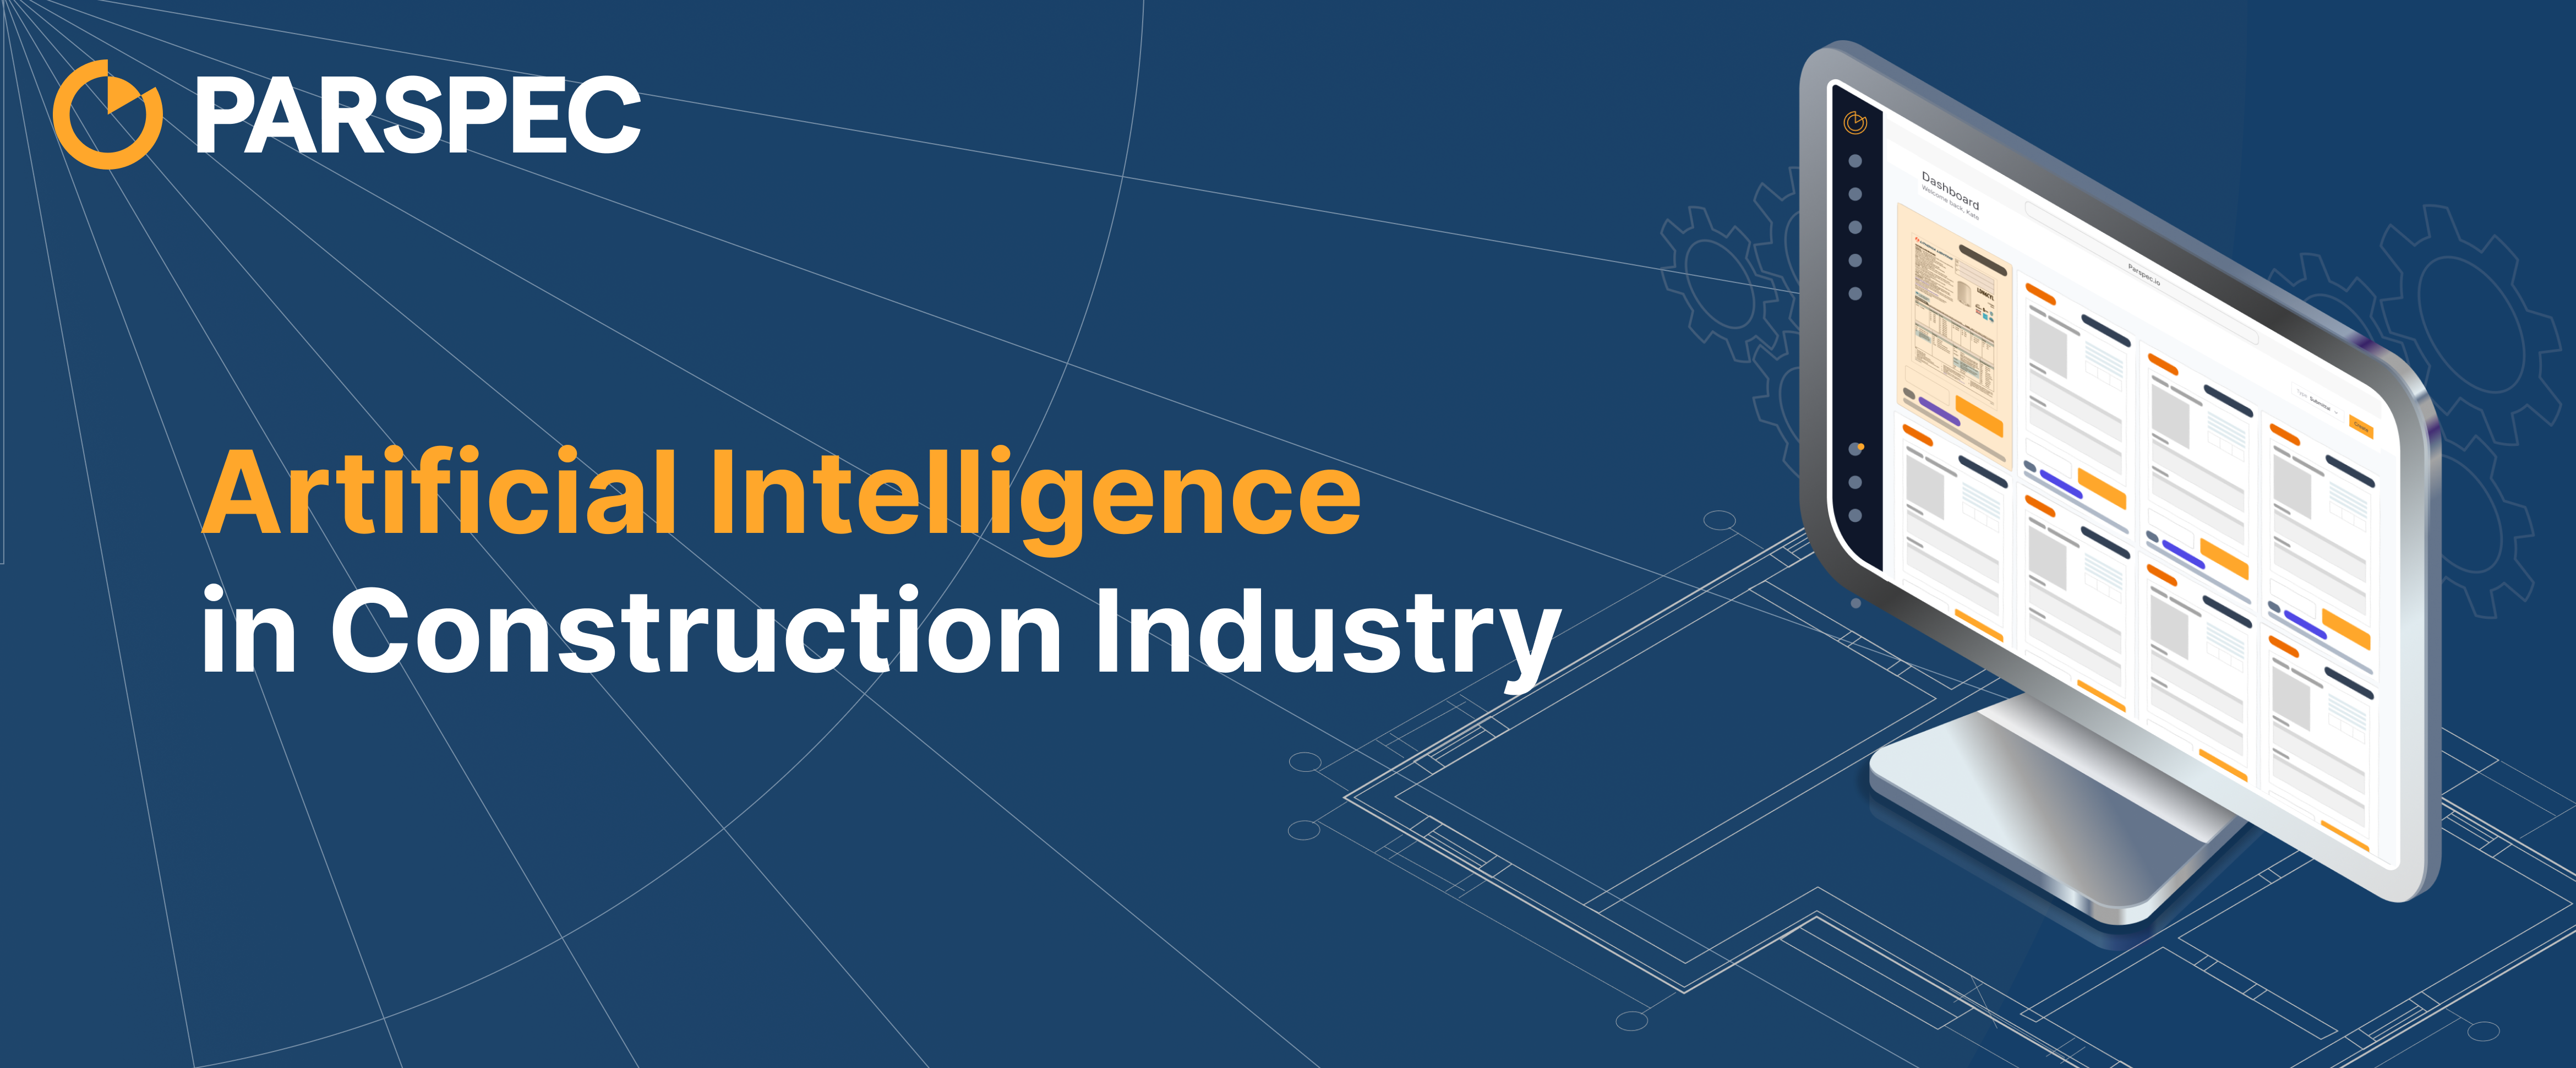 Artificial Intelligence in Construction Industry